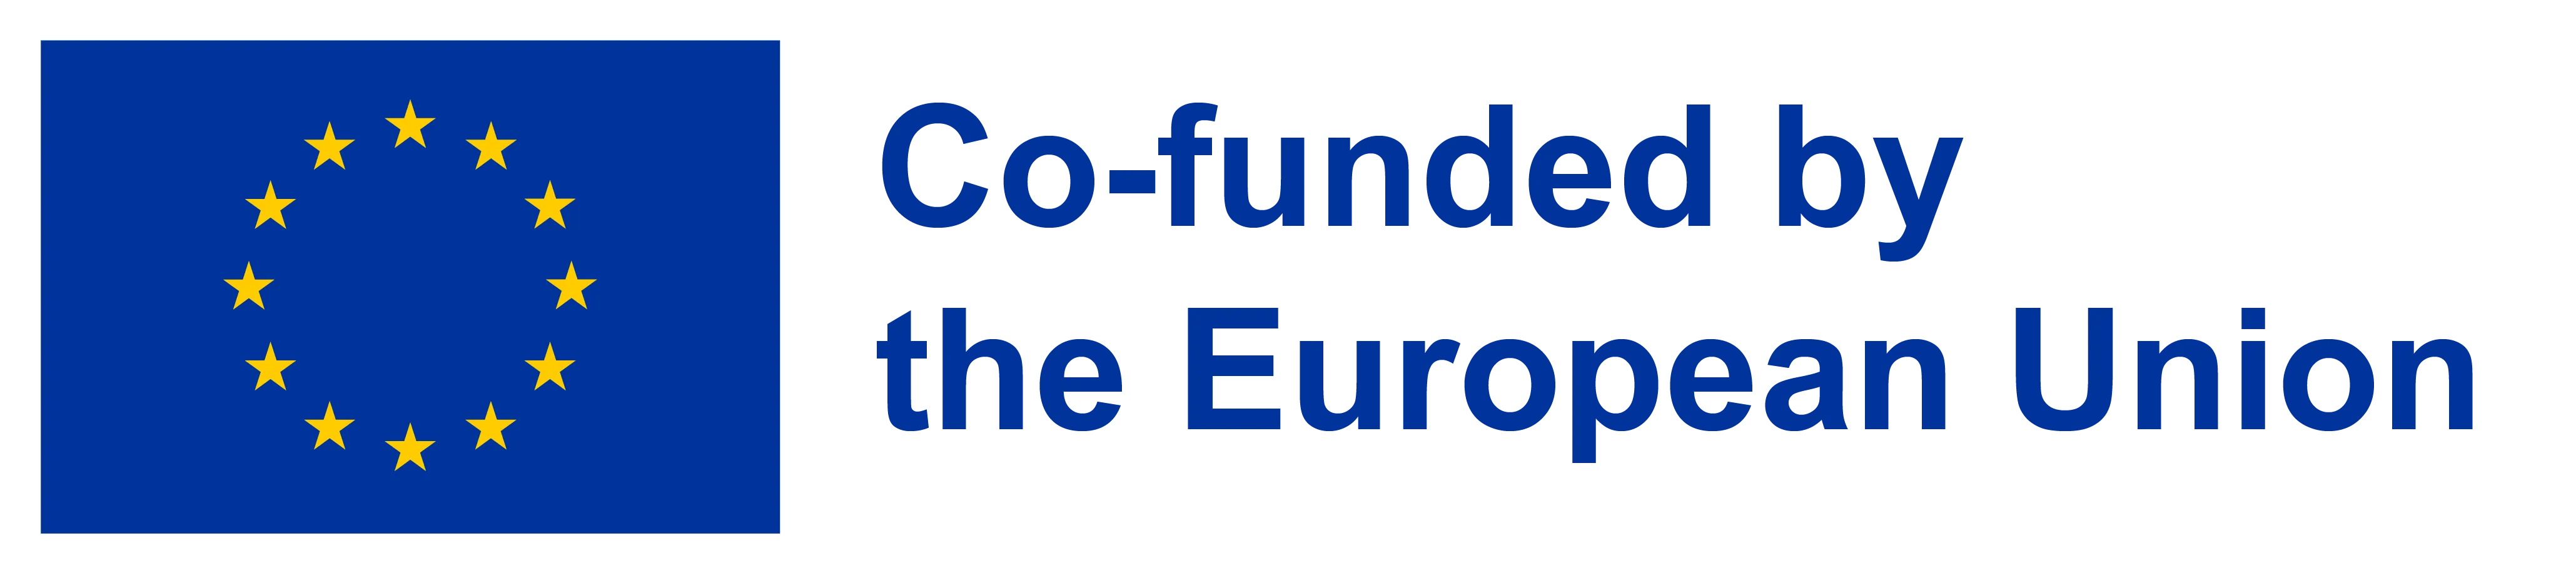 Logo indicating co-funding by the European Union.